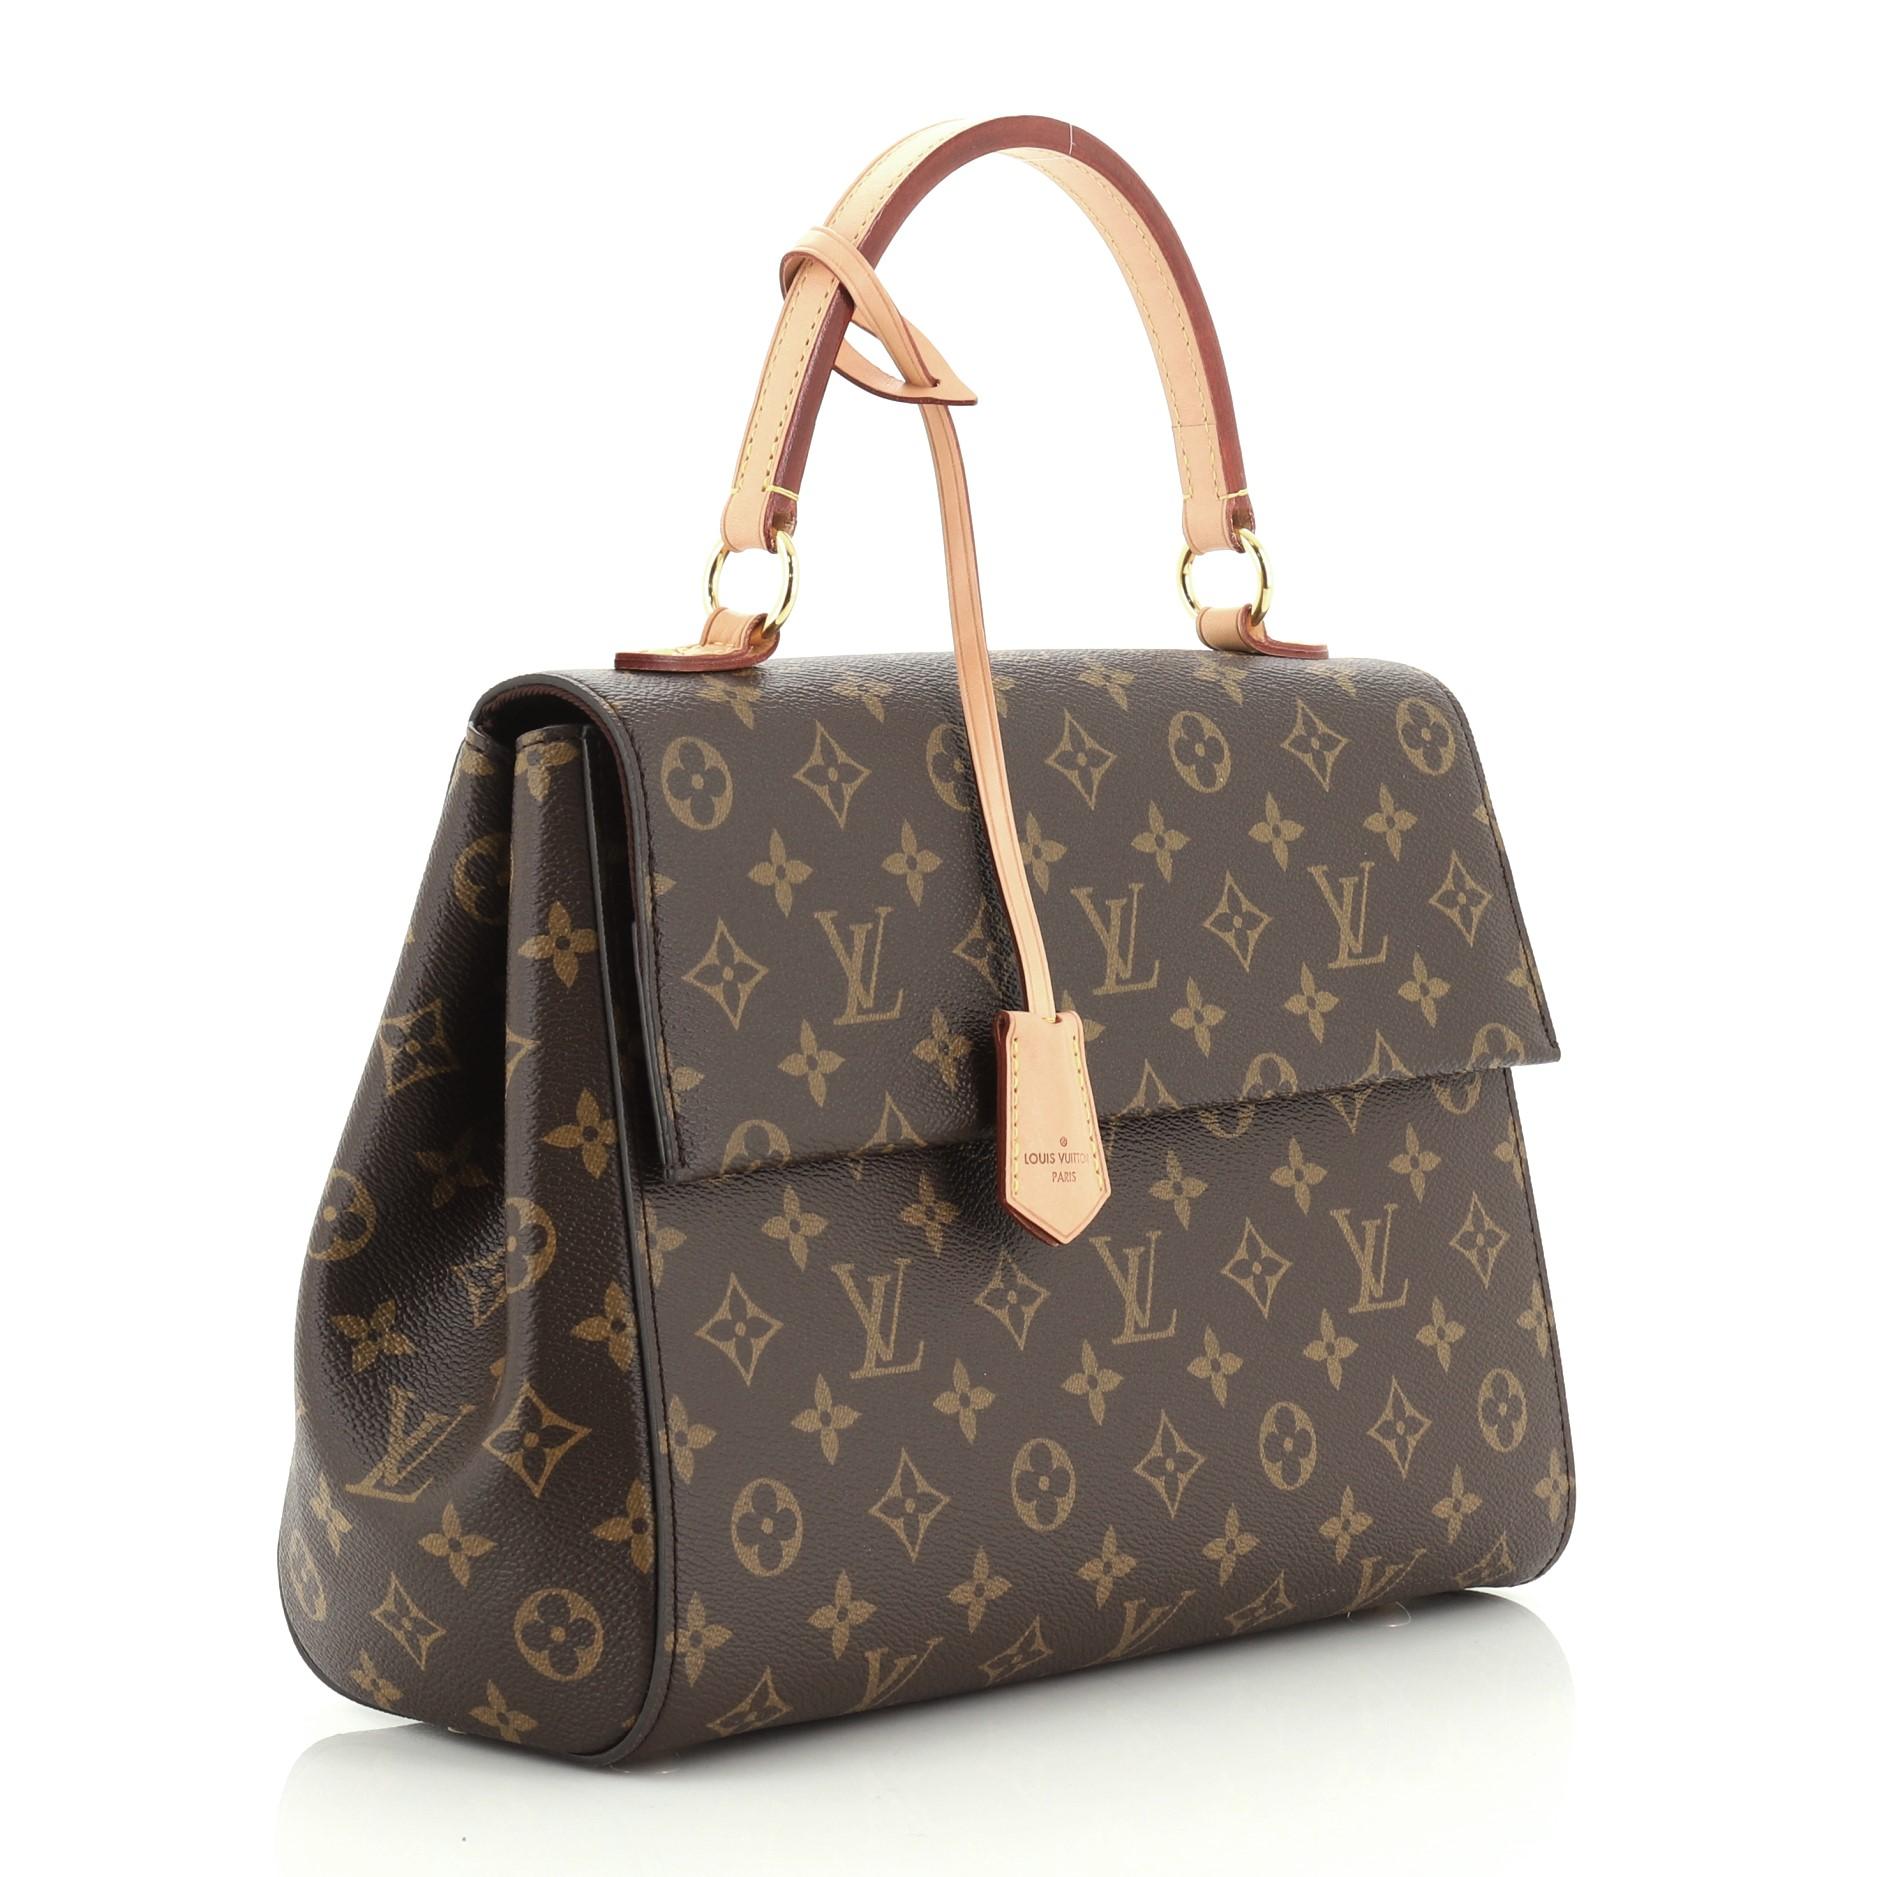 This Louis Vuitton Cluny Top Handle Bag Monogram Canvas MM, crafted in brown monogram coated canvas, features a leather top handle, colored detachable strap, front flap, protective base studs, and gold-tone hardware. Its magnetic closure opens to a